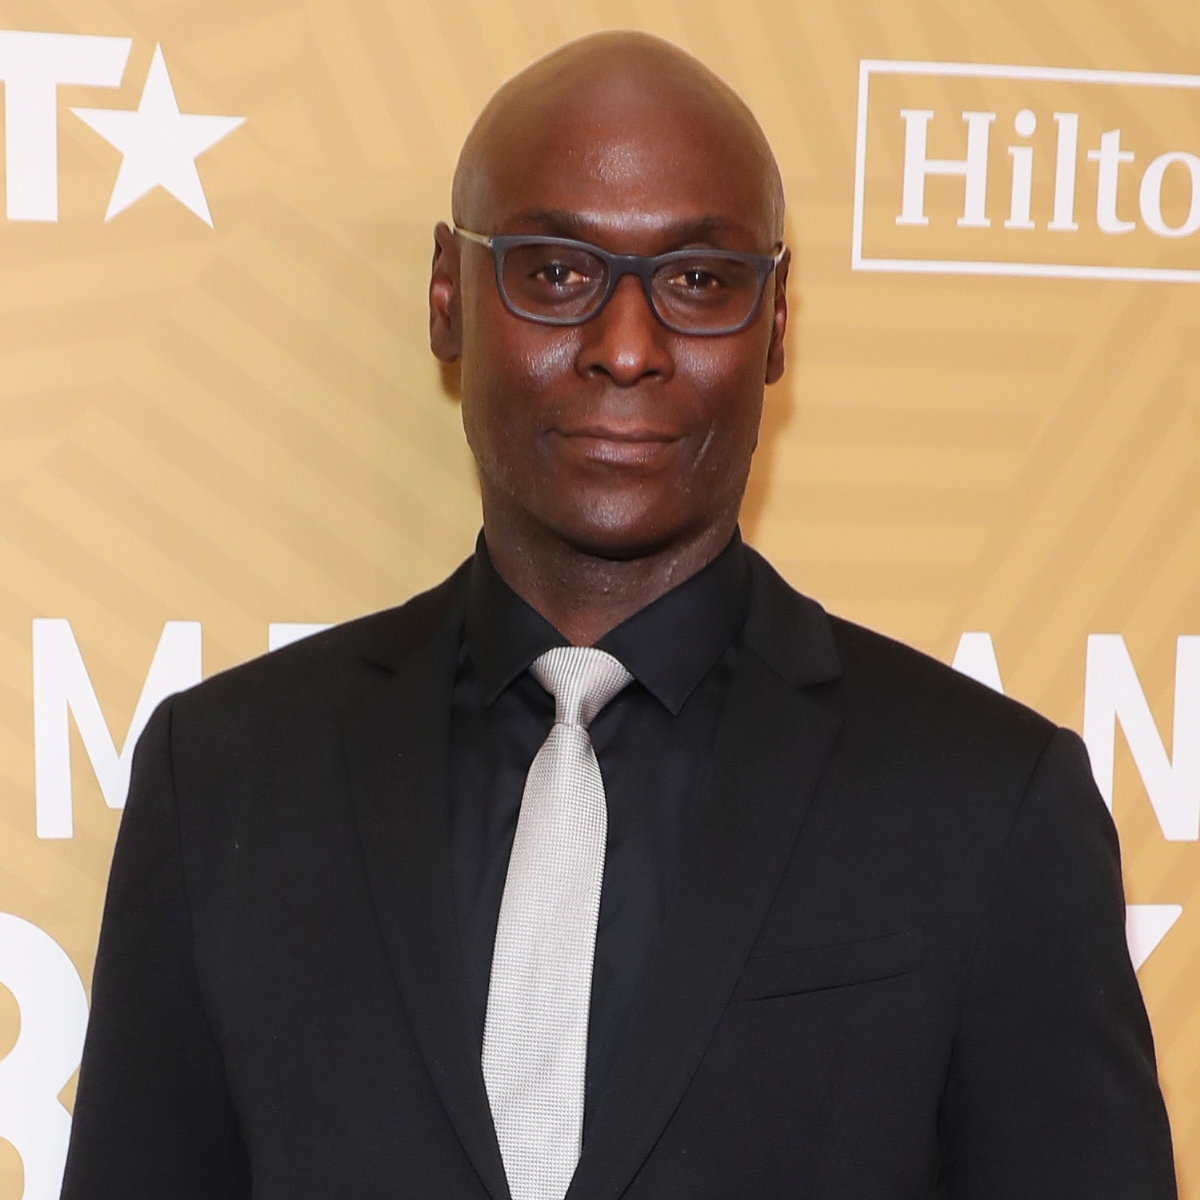 Lance Reddick's family disputes cause of death report